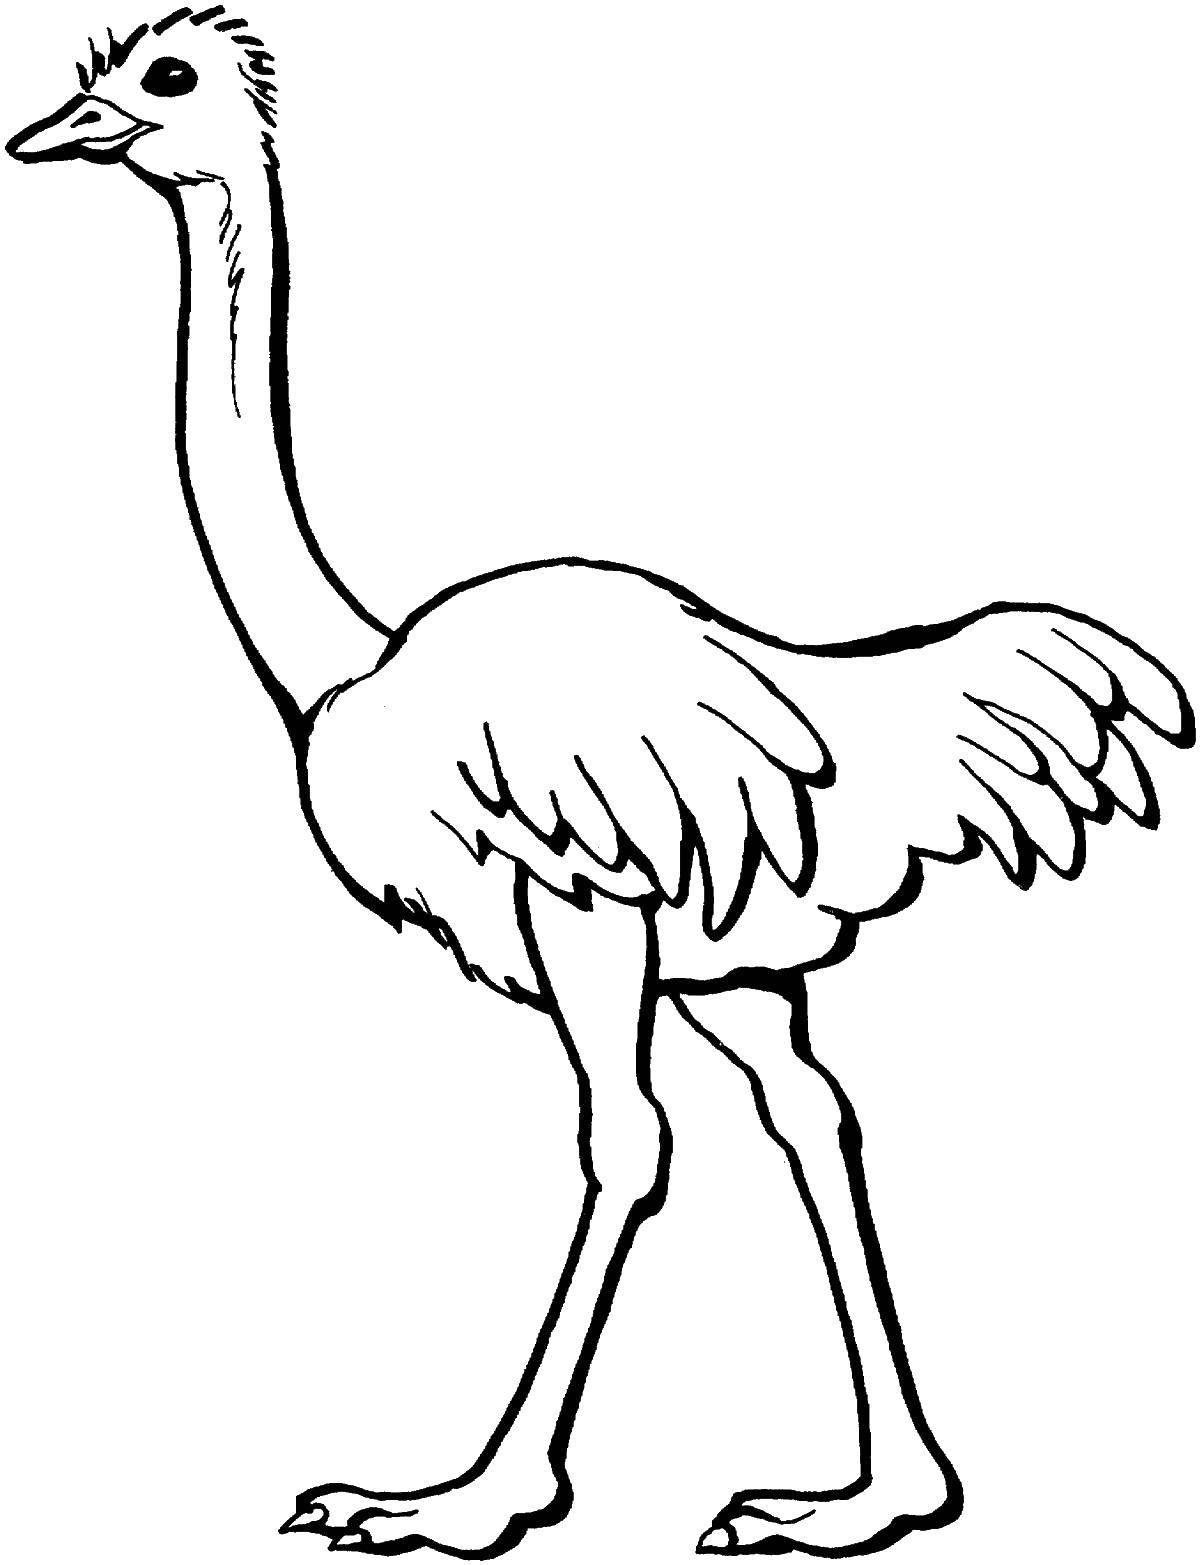 Coloring Ostrich with a long neck. Category birds. Tags:  ostrich, sand, neck.